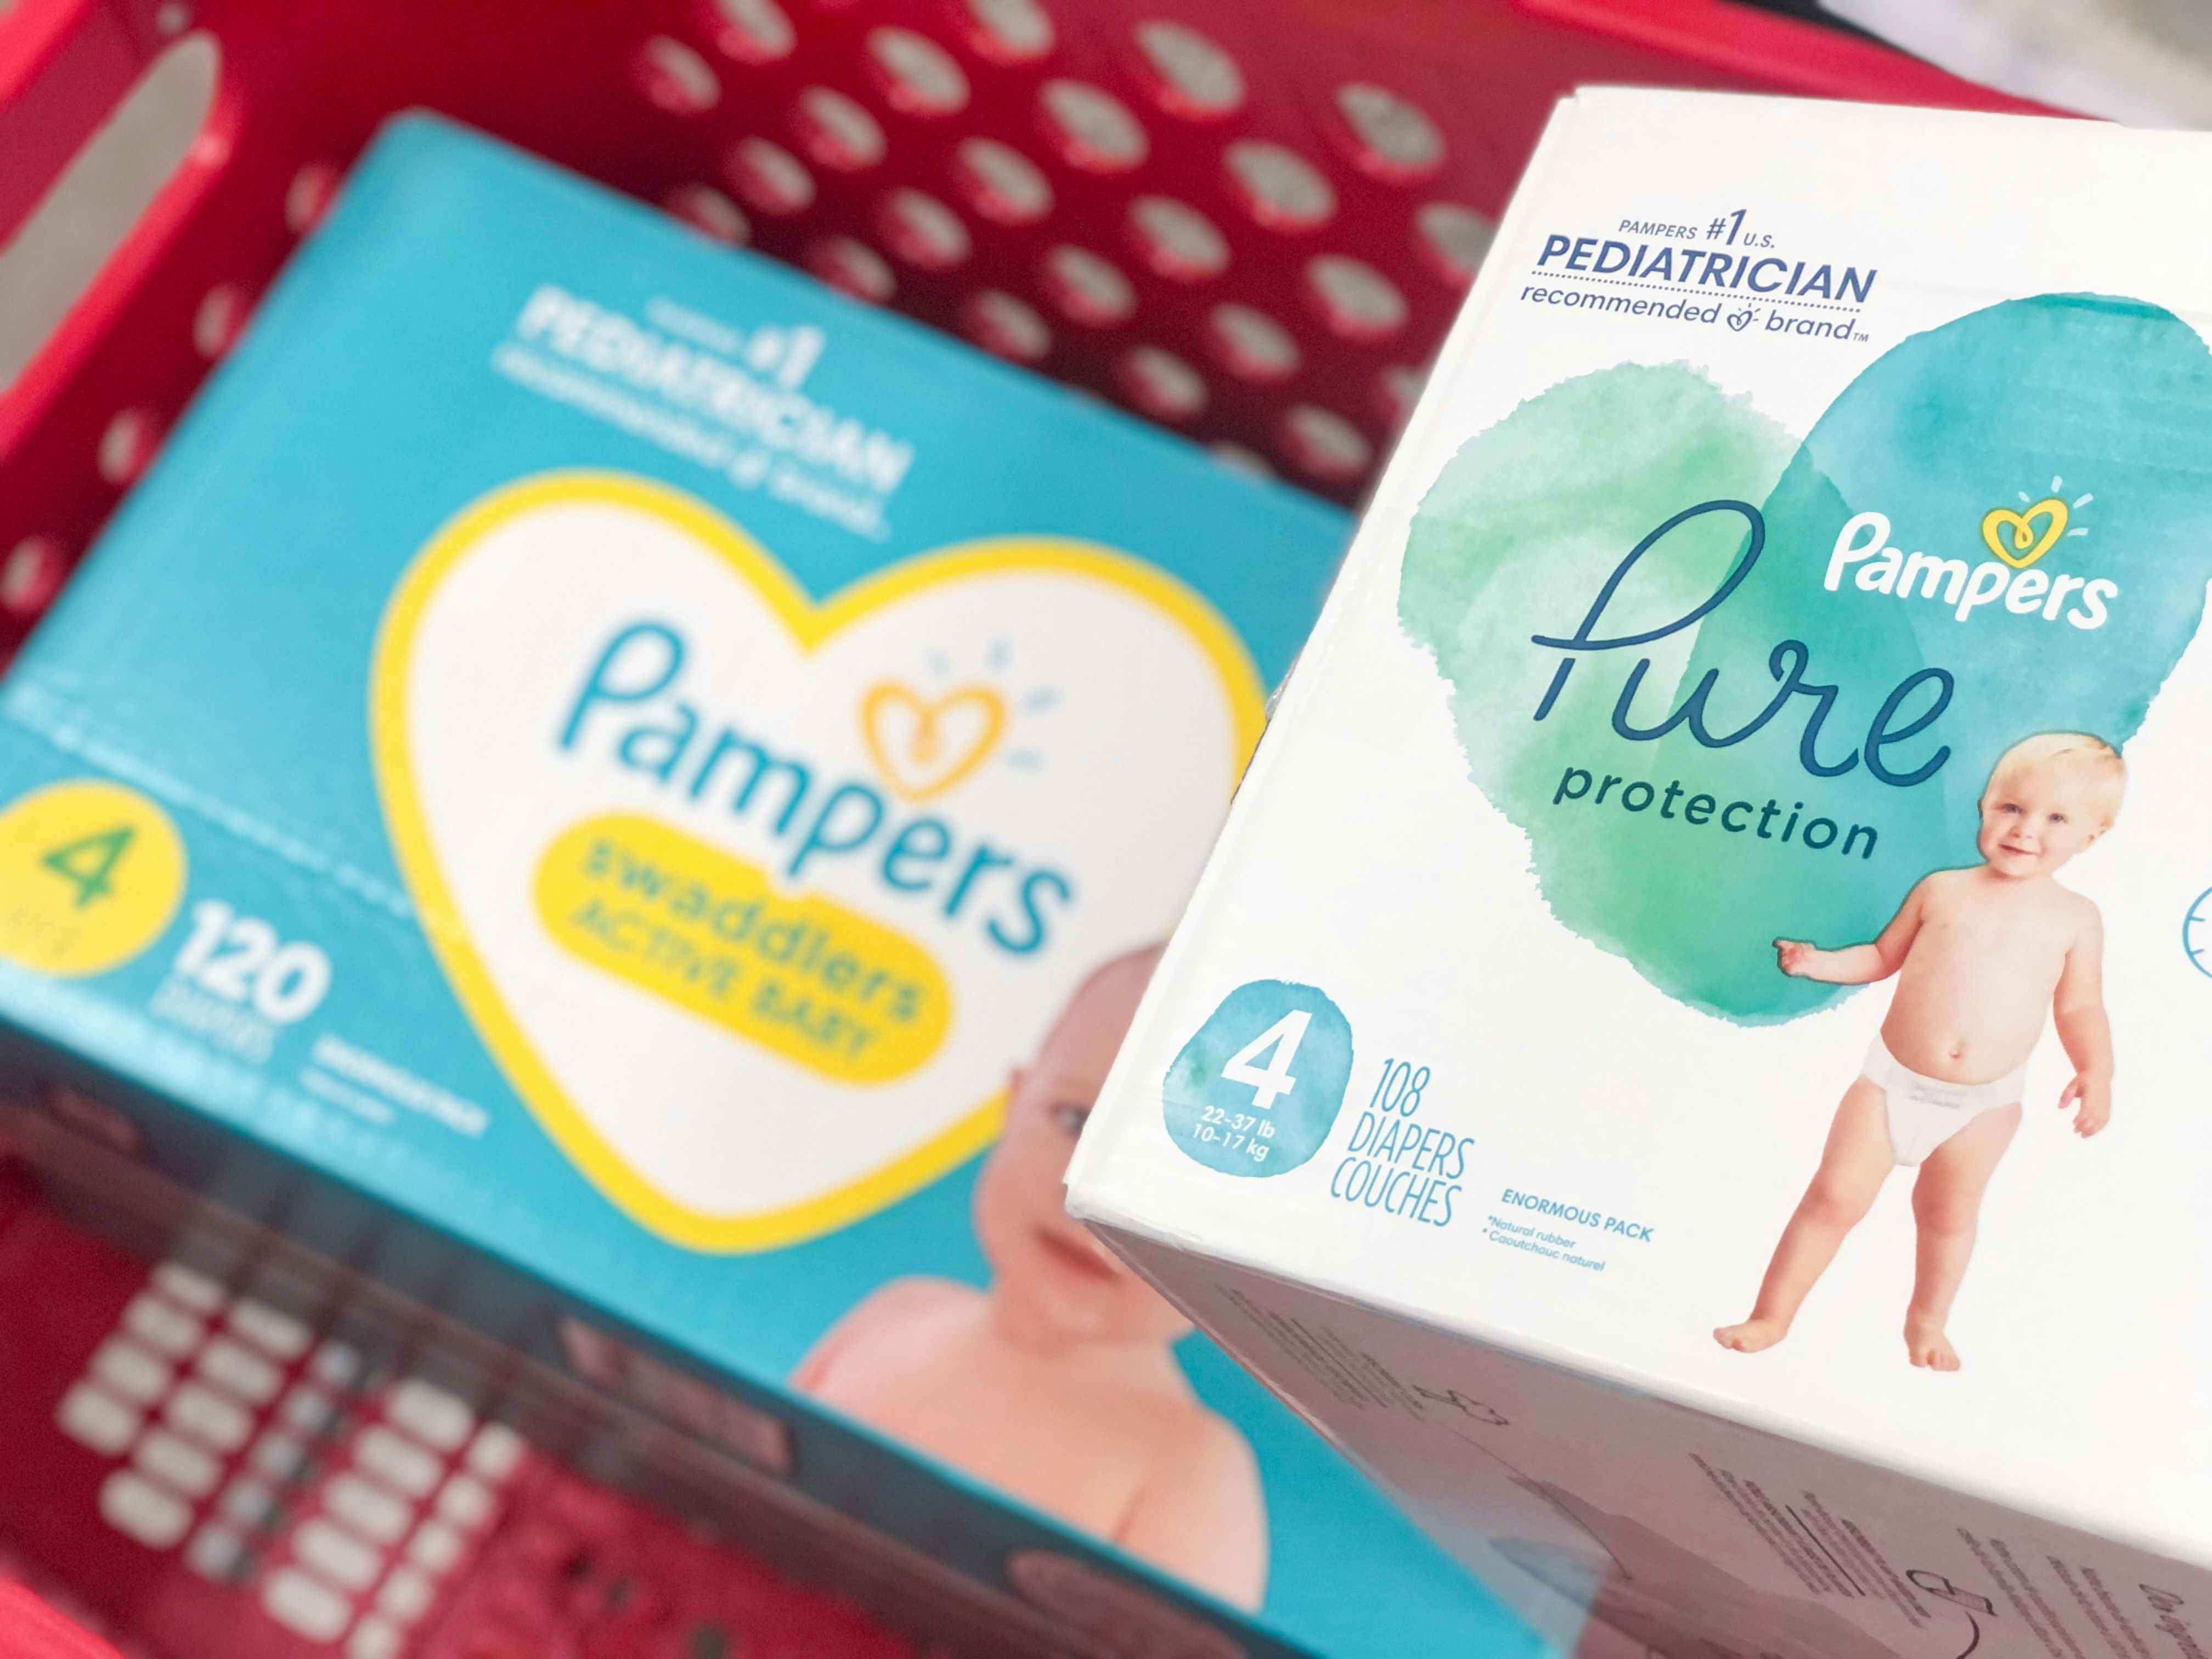 Pampers boxes in shopping cart